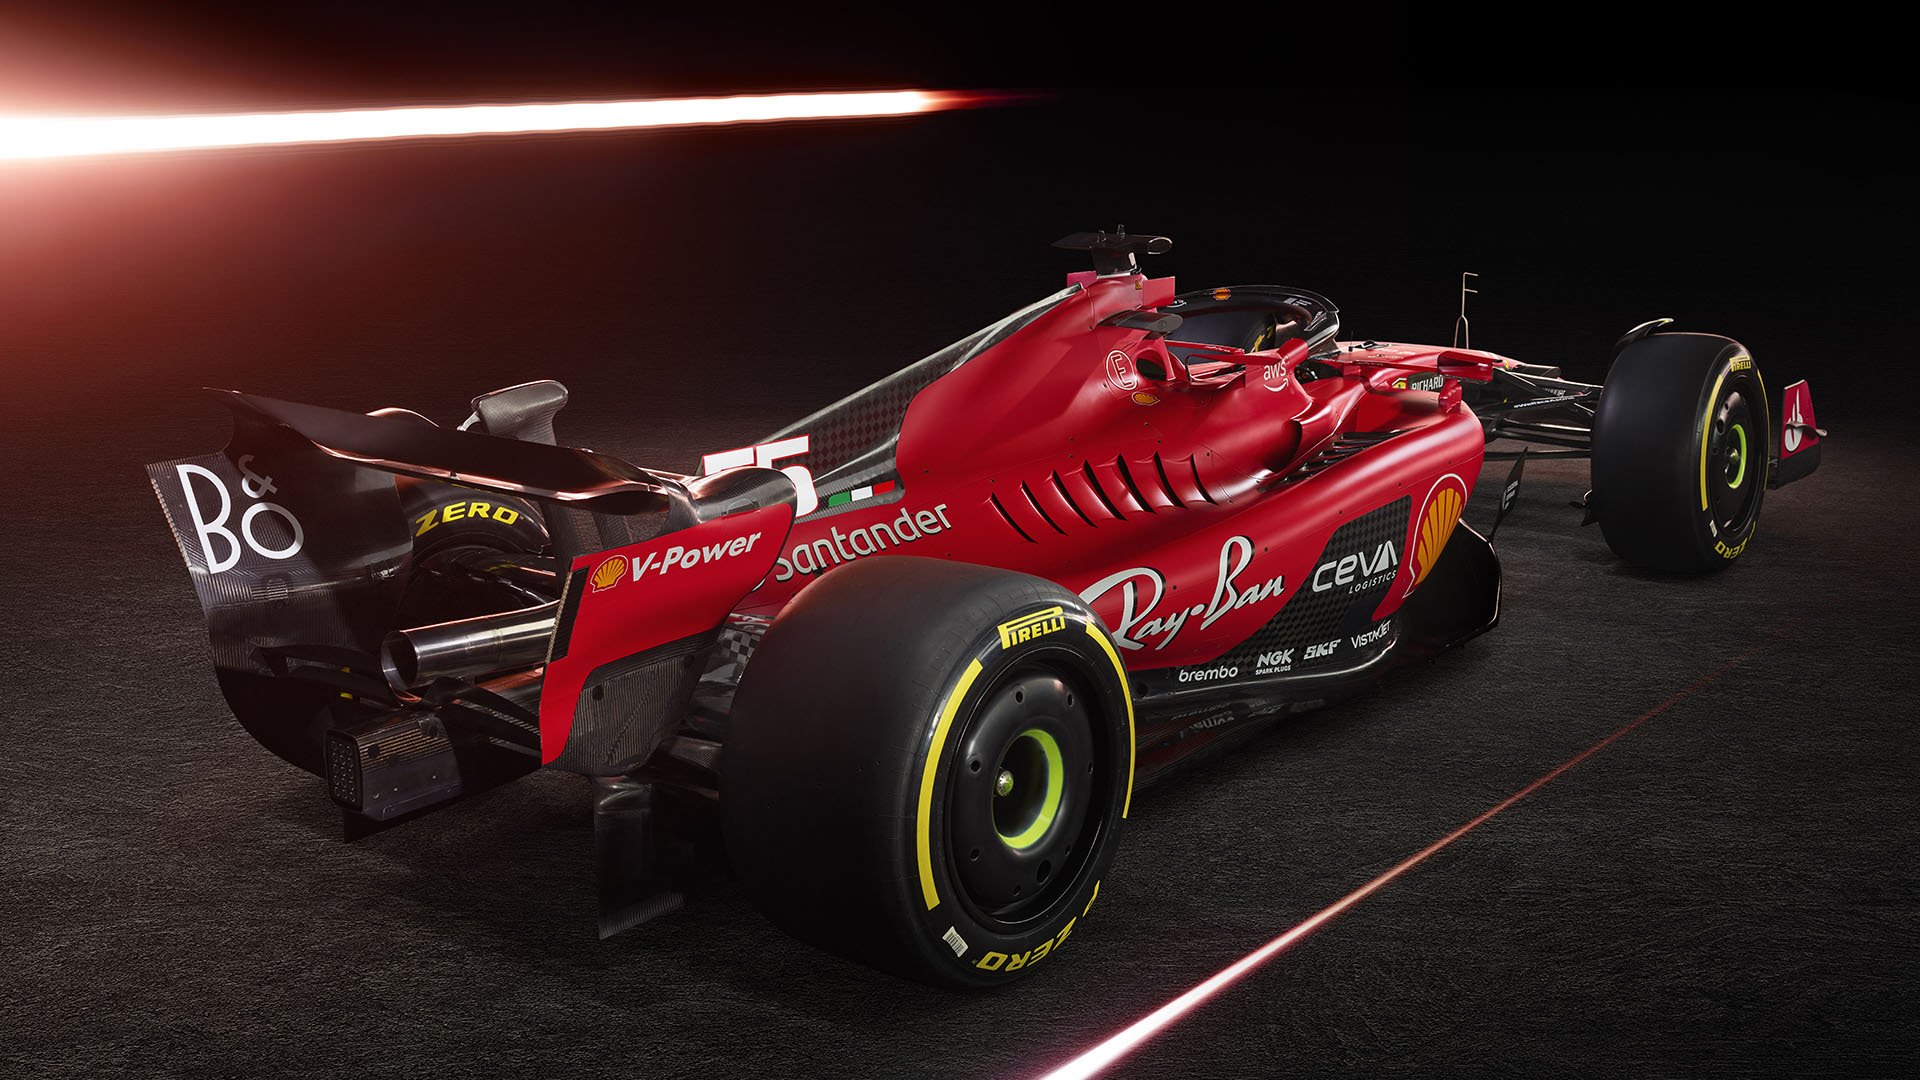 GALLERY: Check out every angle of Ferrari's new 2023 F1 car and livery. Formula 1®